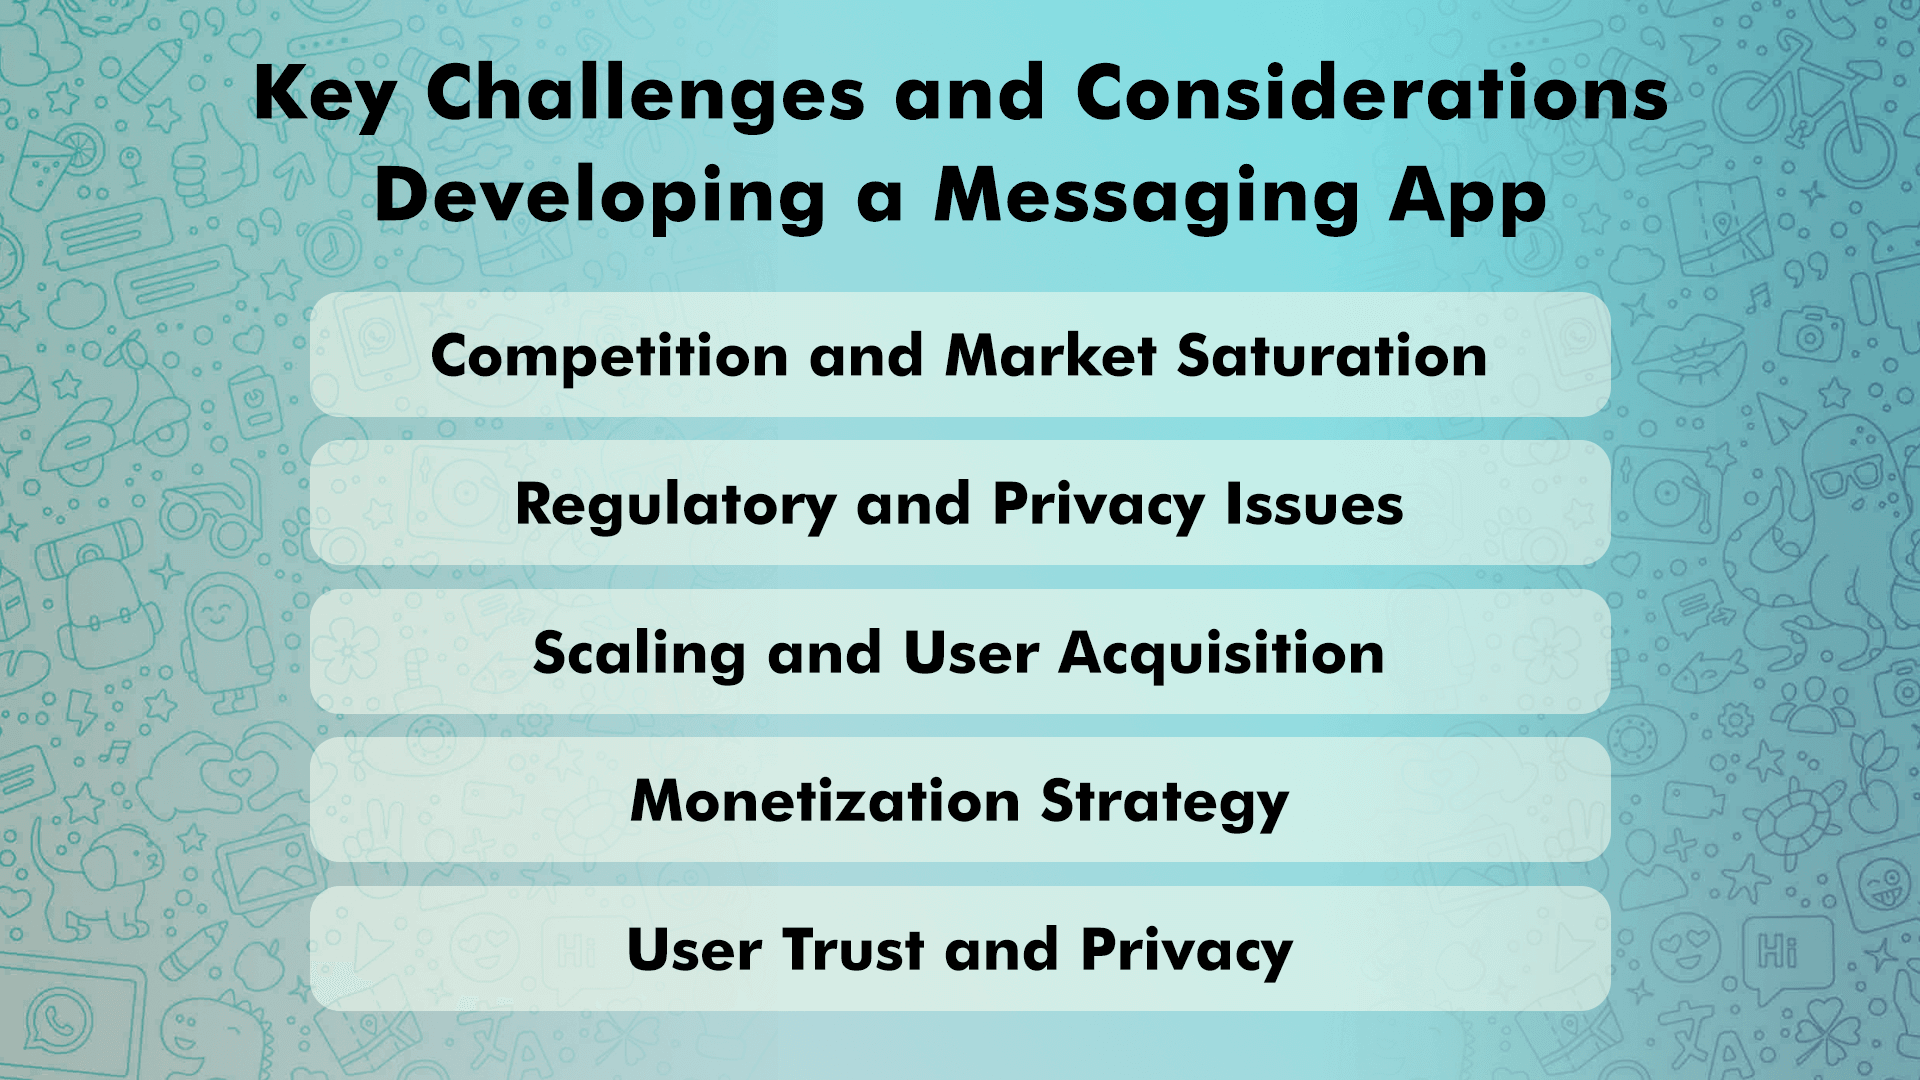 Key Challenges and Considerations Developing a Messaging App